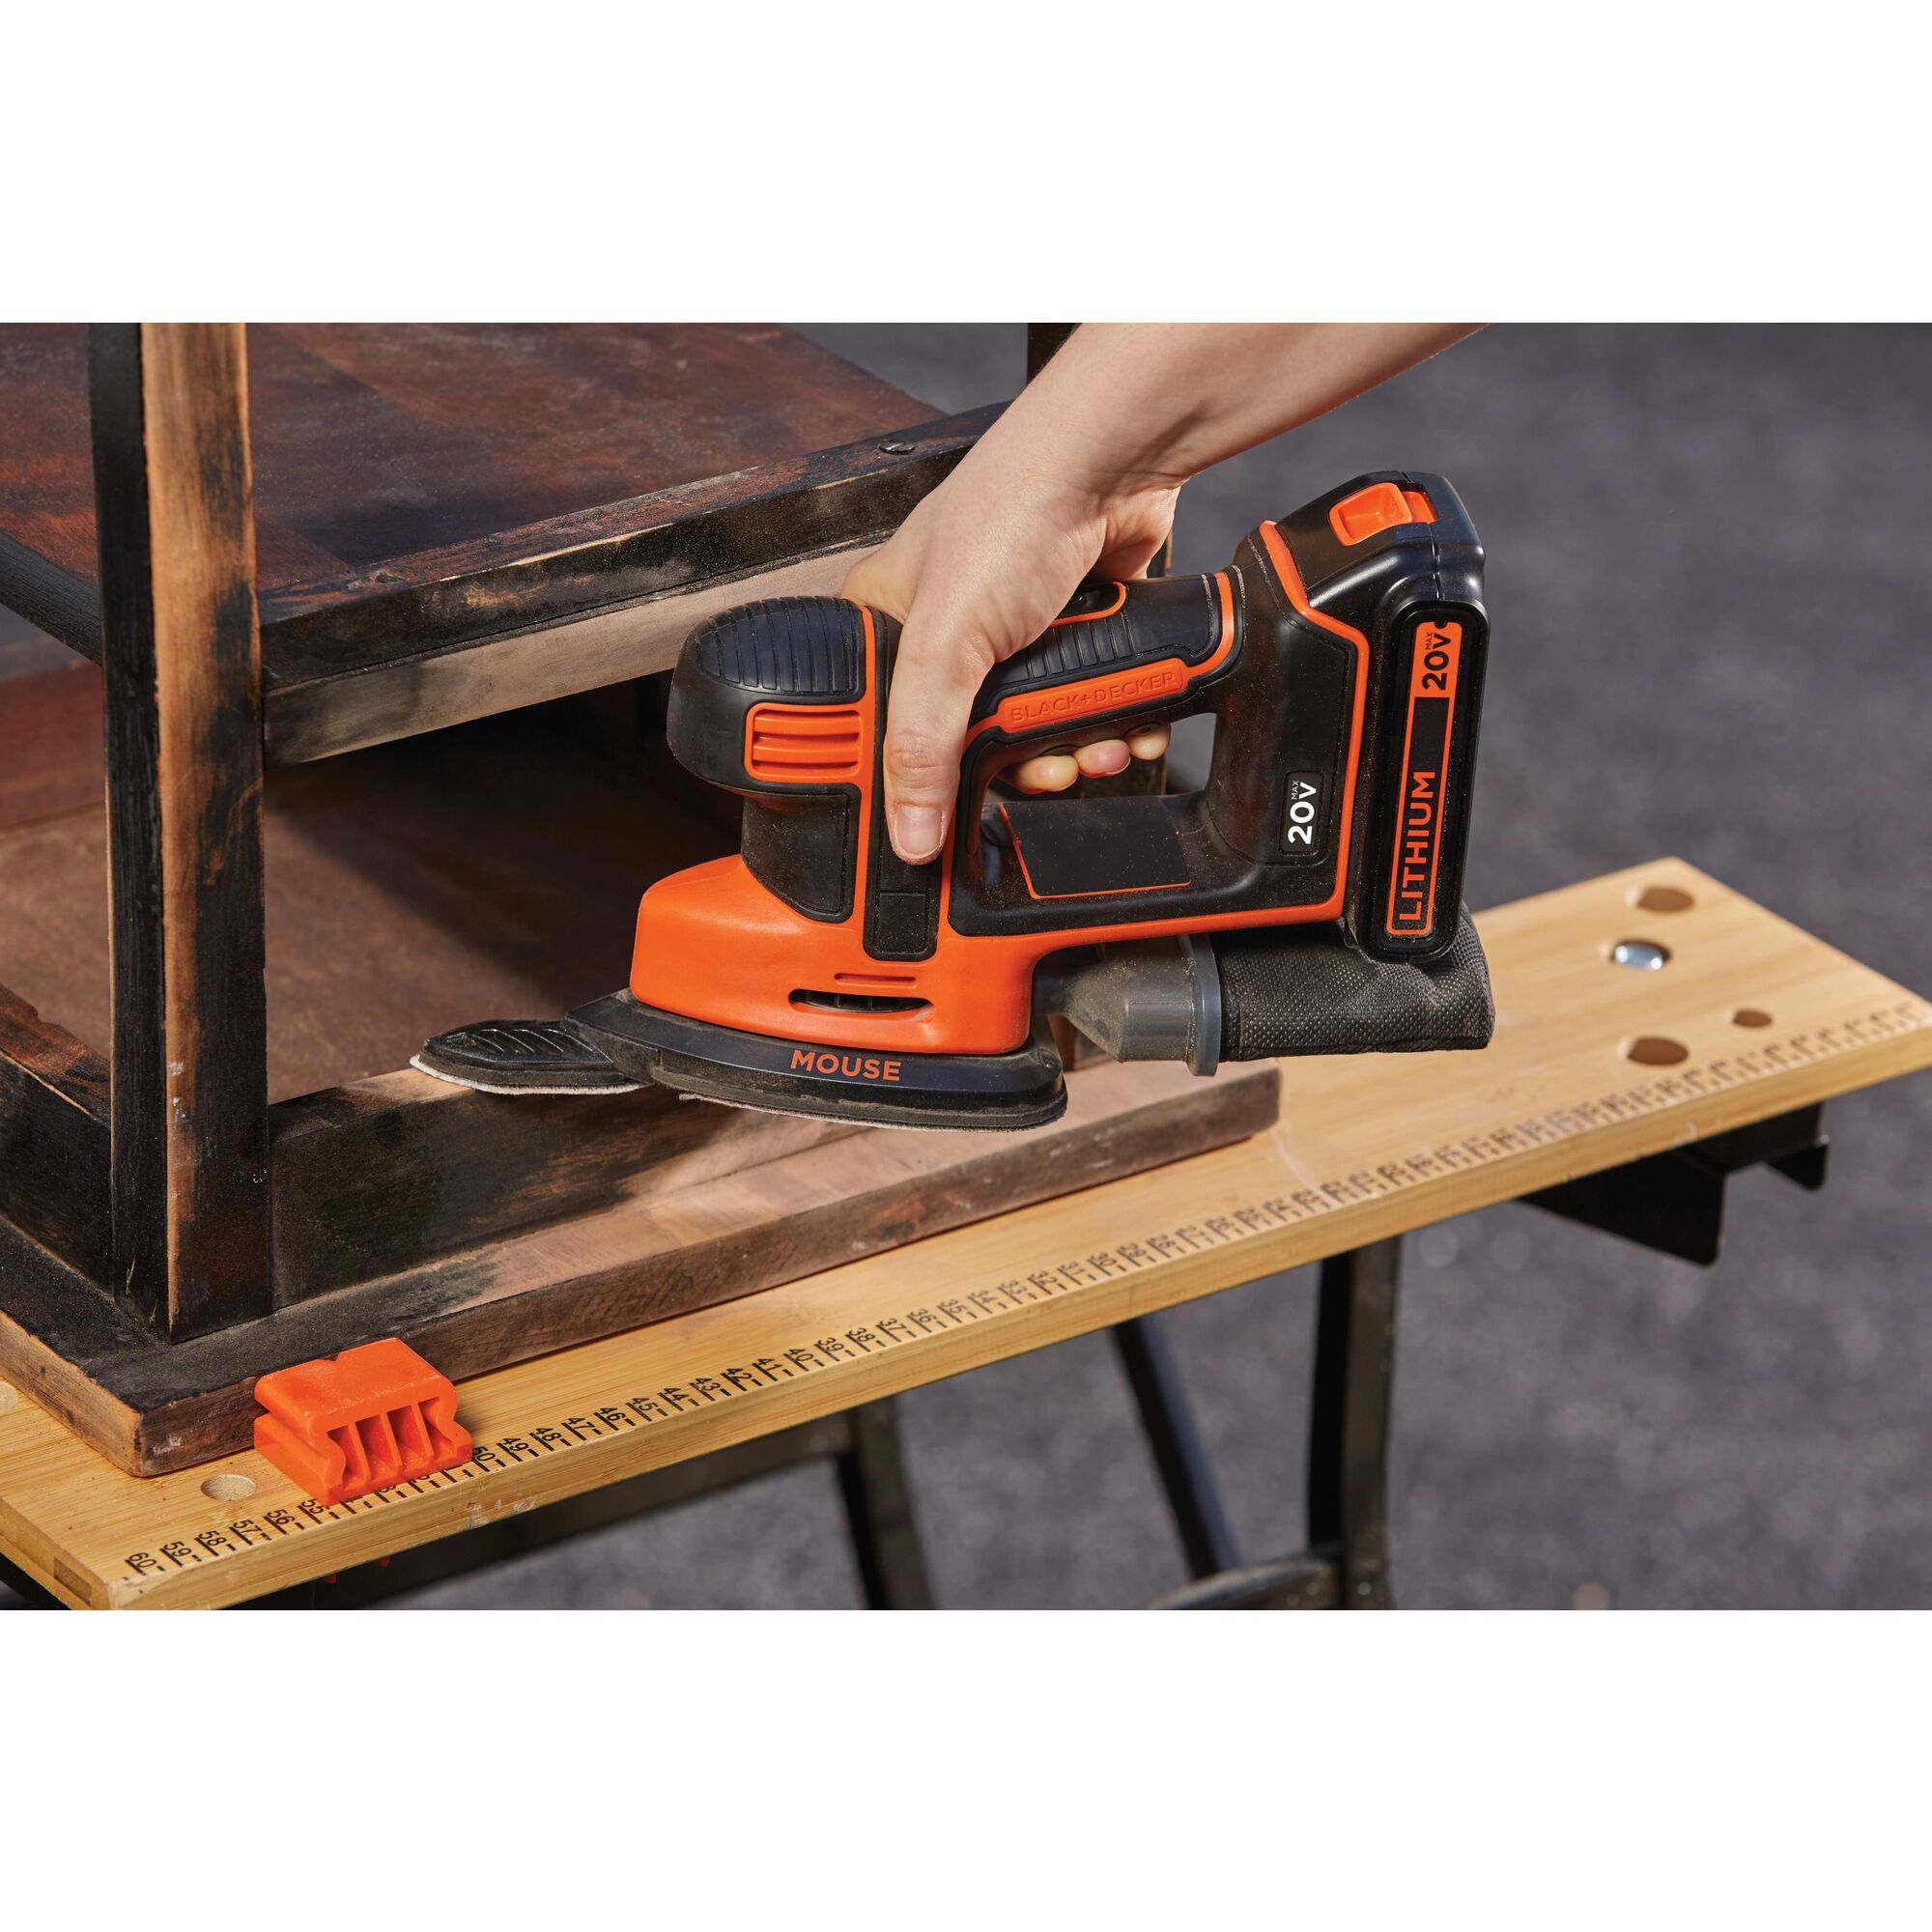 Corded Drill Driver and MOUSE Detail Sander combo kit being used to sand wooden furniture.